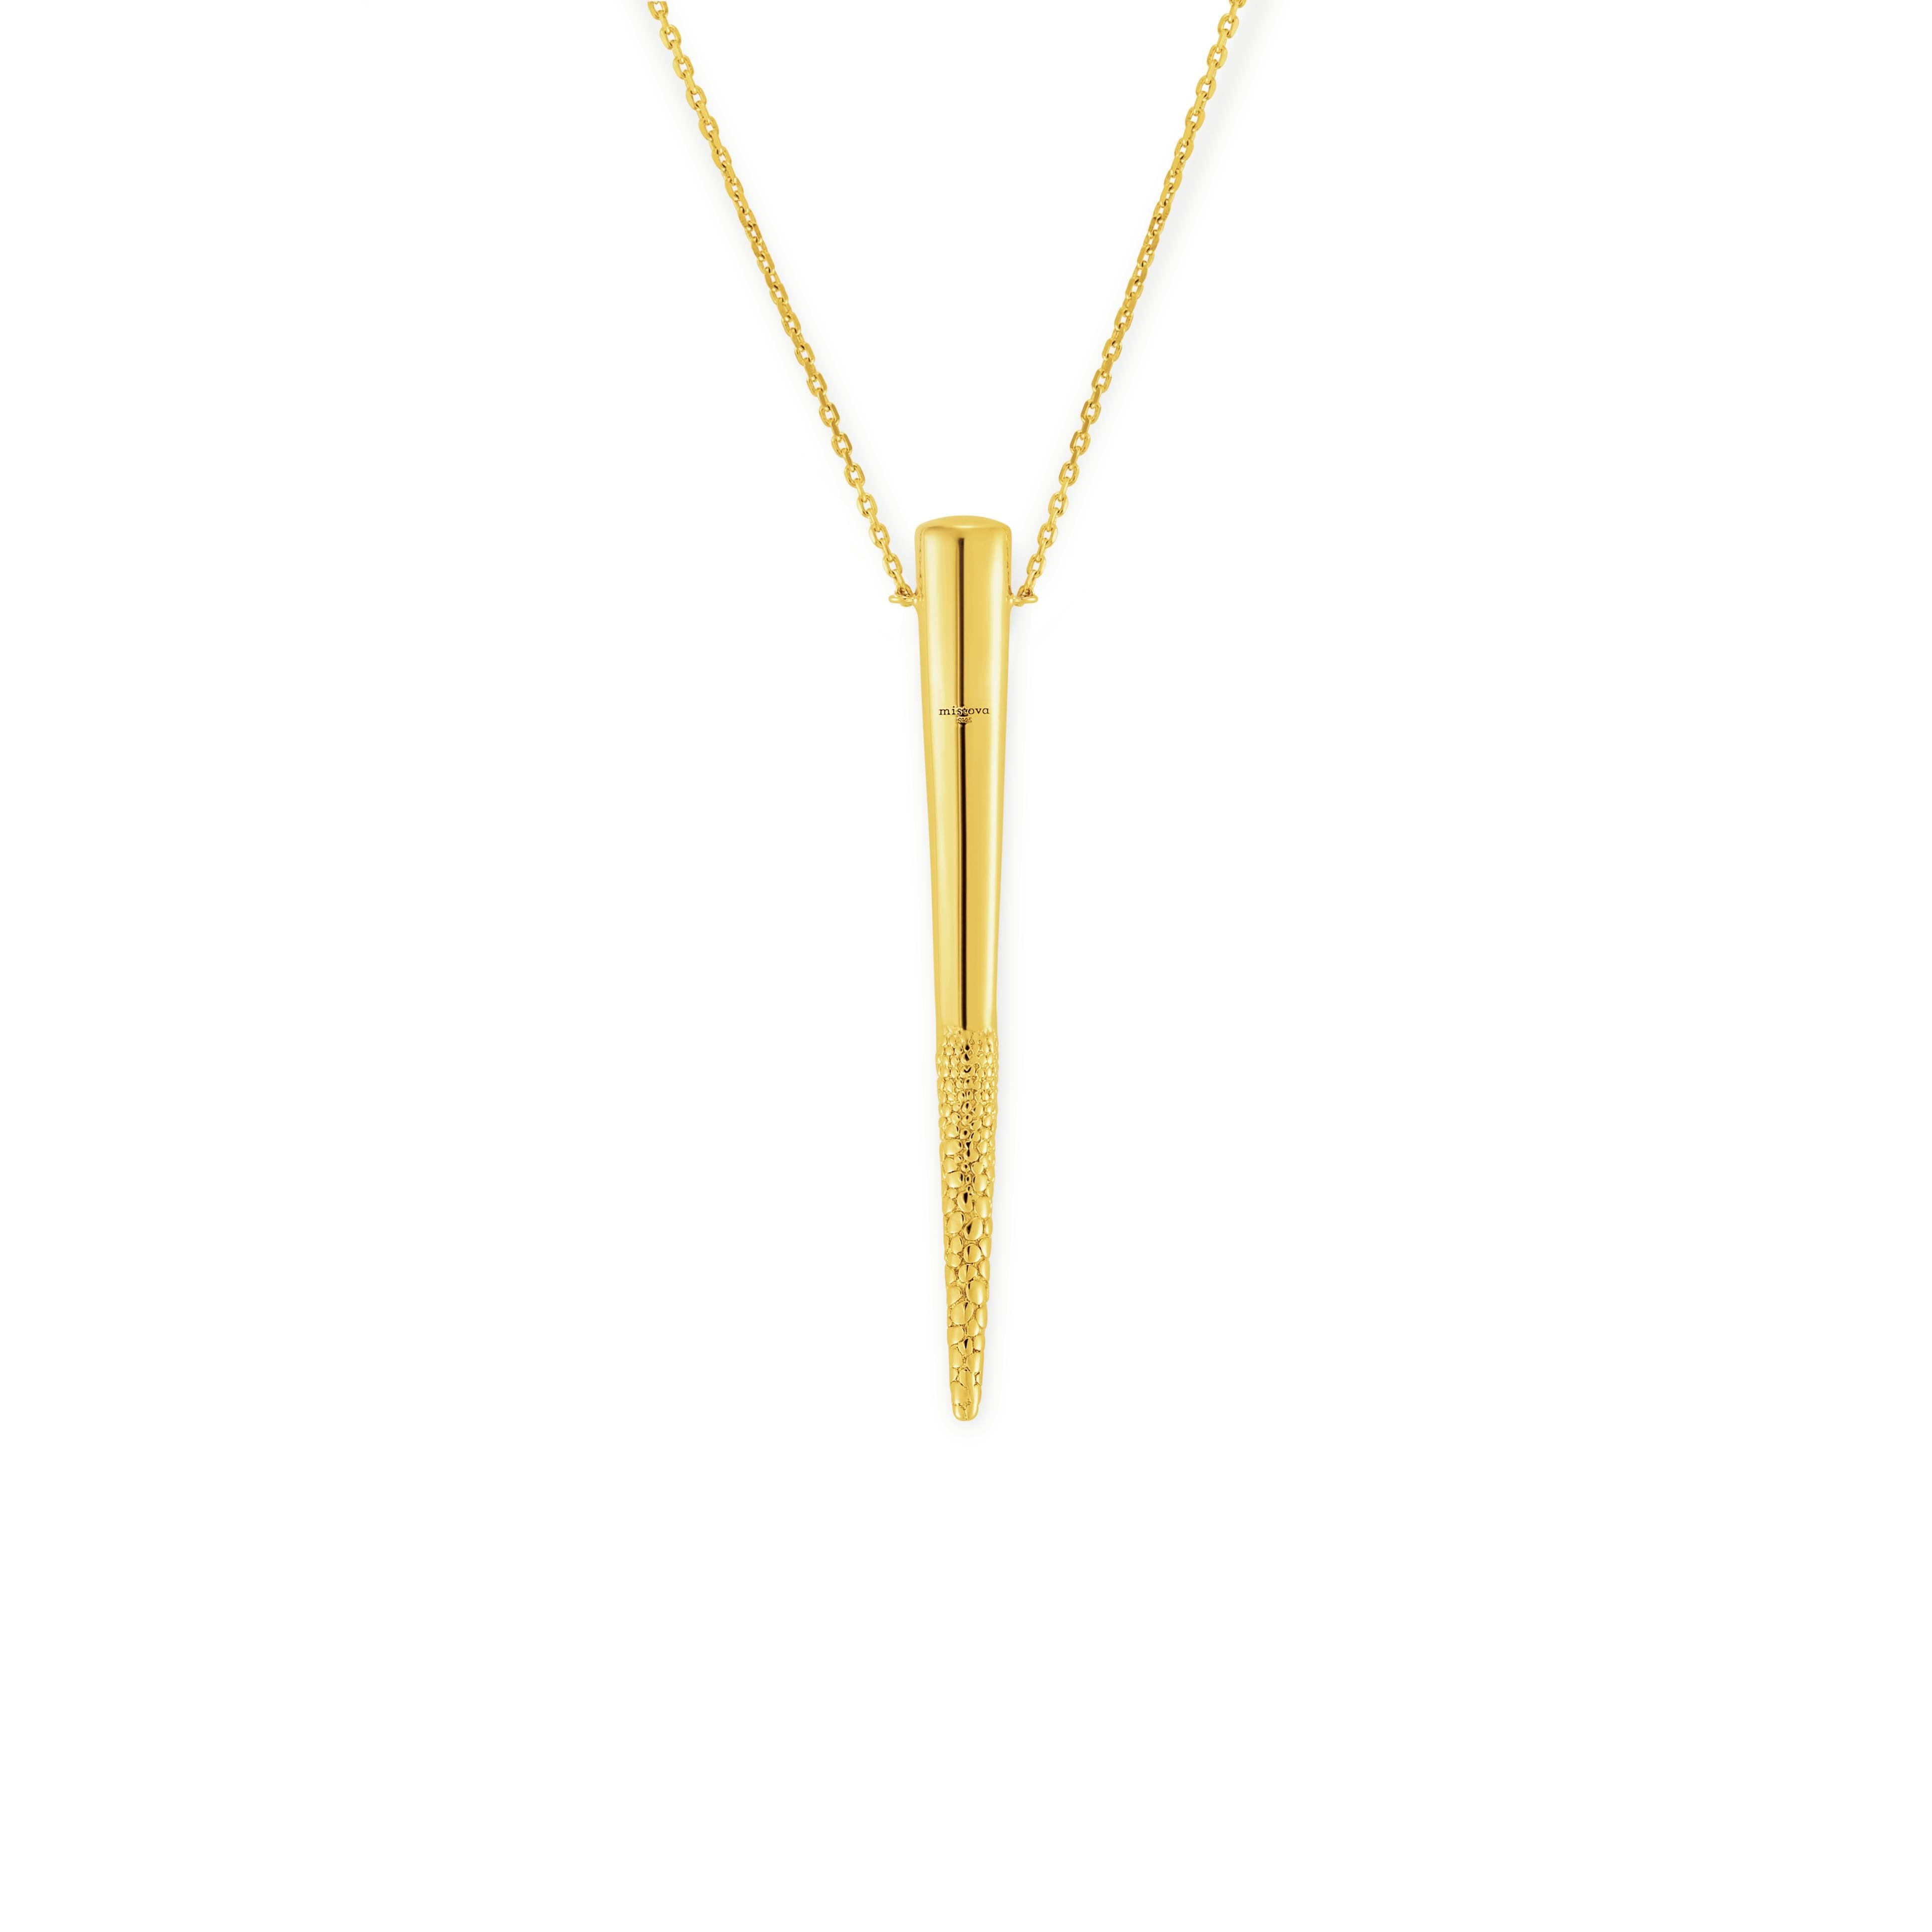 Sharp strong and effortless. Mistova's Particle necklace is a easy to wear and beautifully crafted necklace. Made from highest quality 18K Gold.